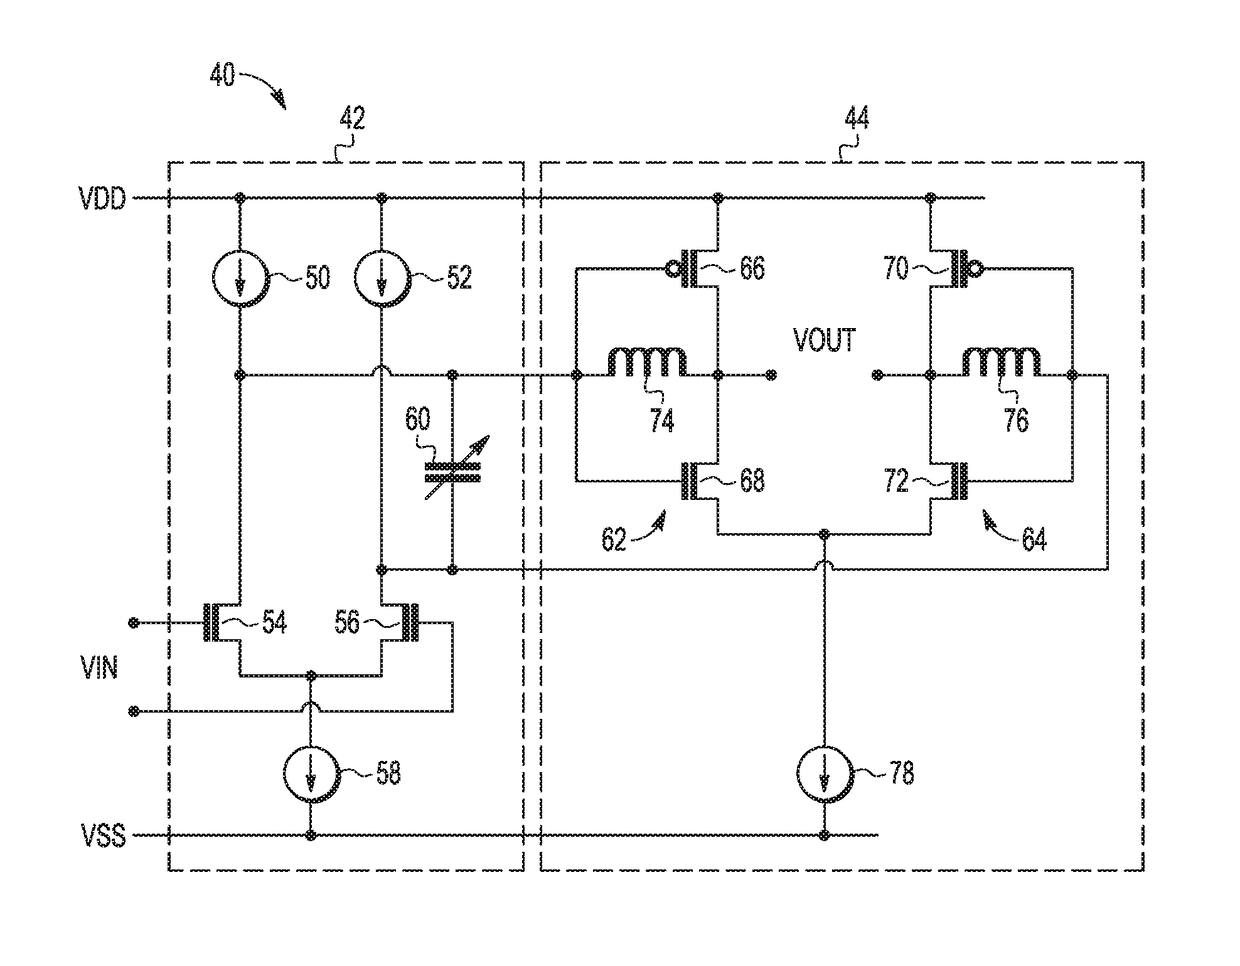 Analog delay cell and tapped delay line comprising the analog delay cell